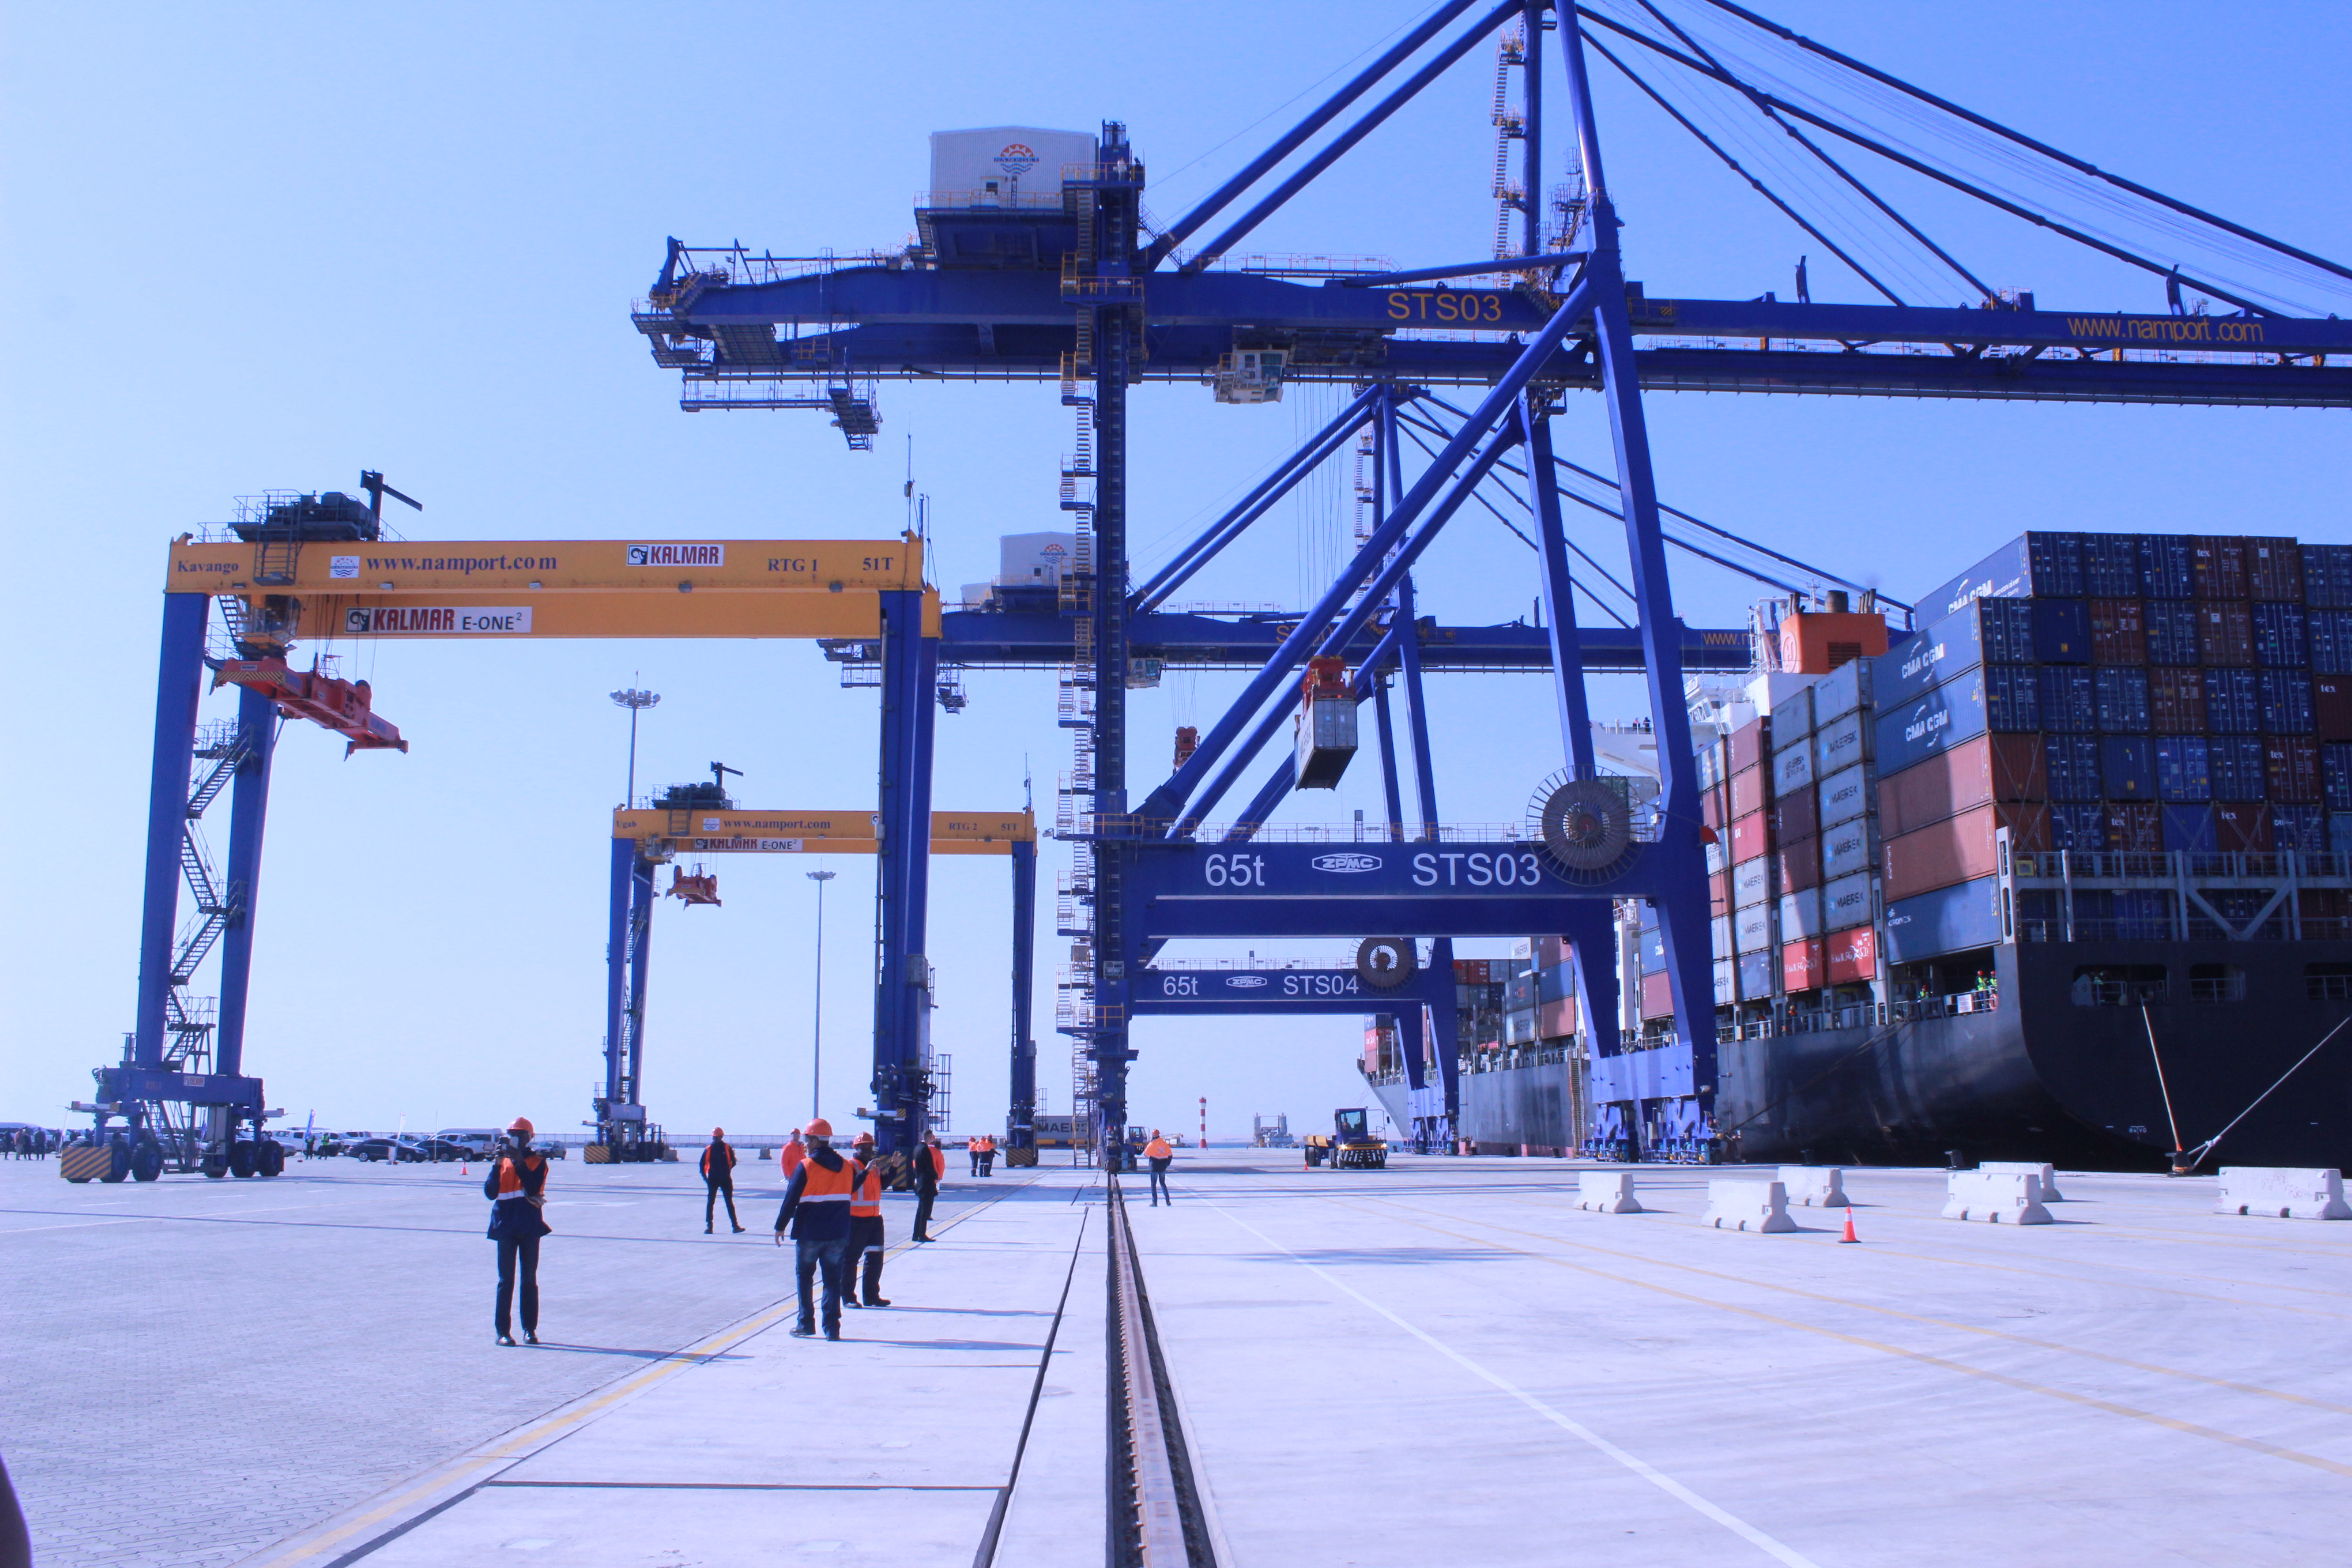 Port of Walvis Bay container terminal